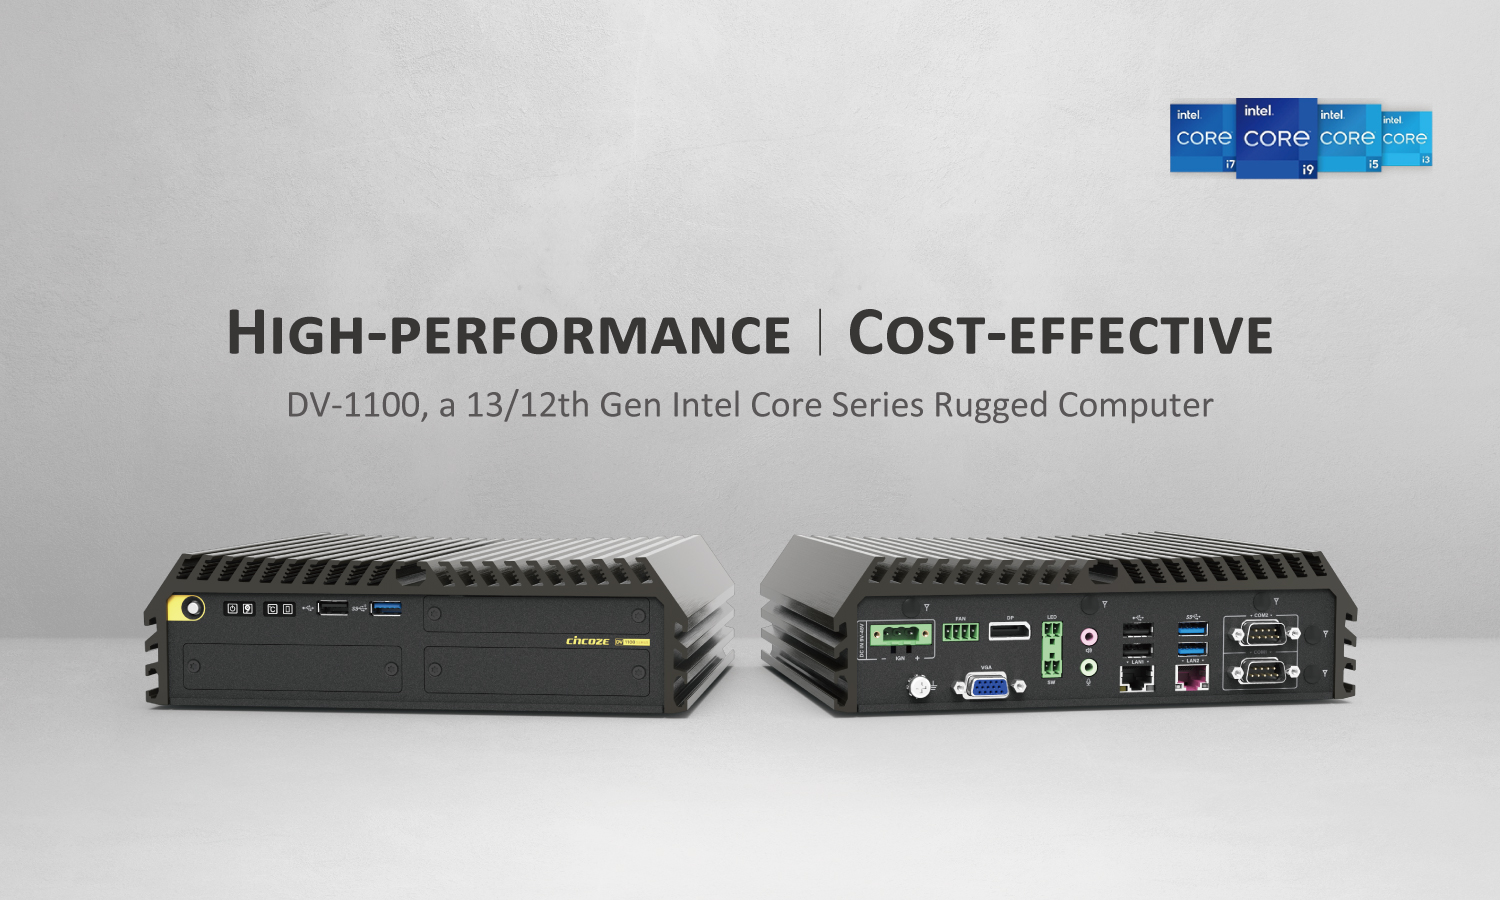 High-performance, Cost-effective - DV-1100, a 13/12th Gen Intel Core Series Rugged Computer